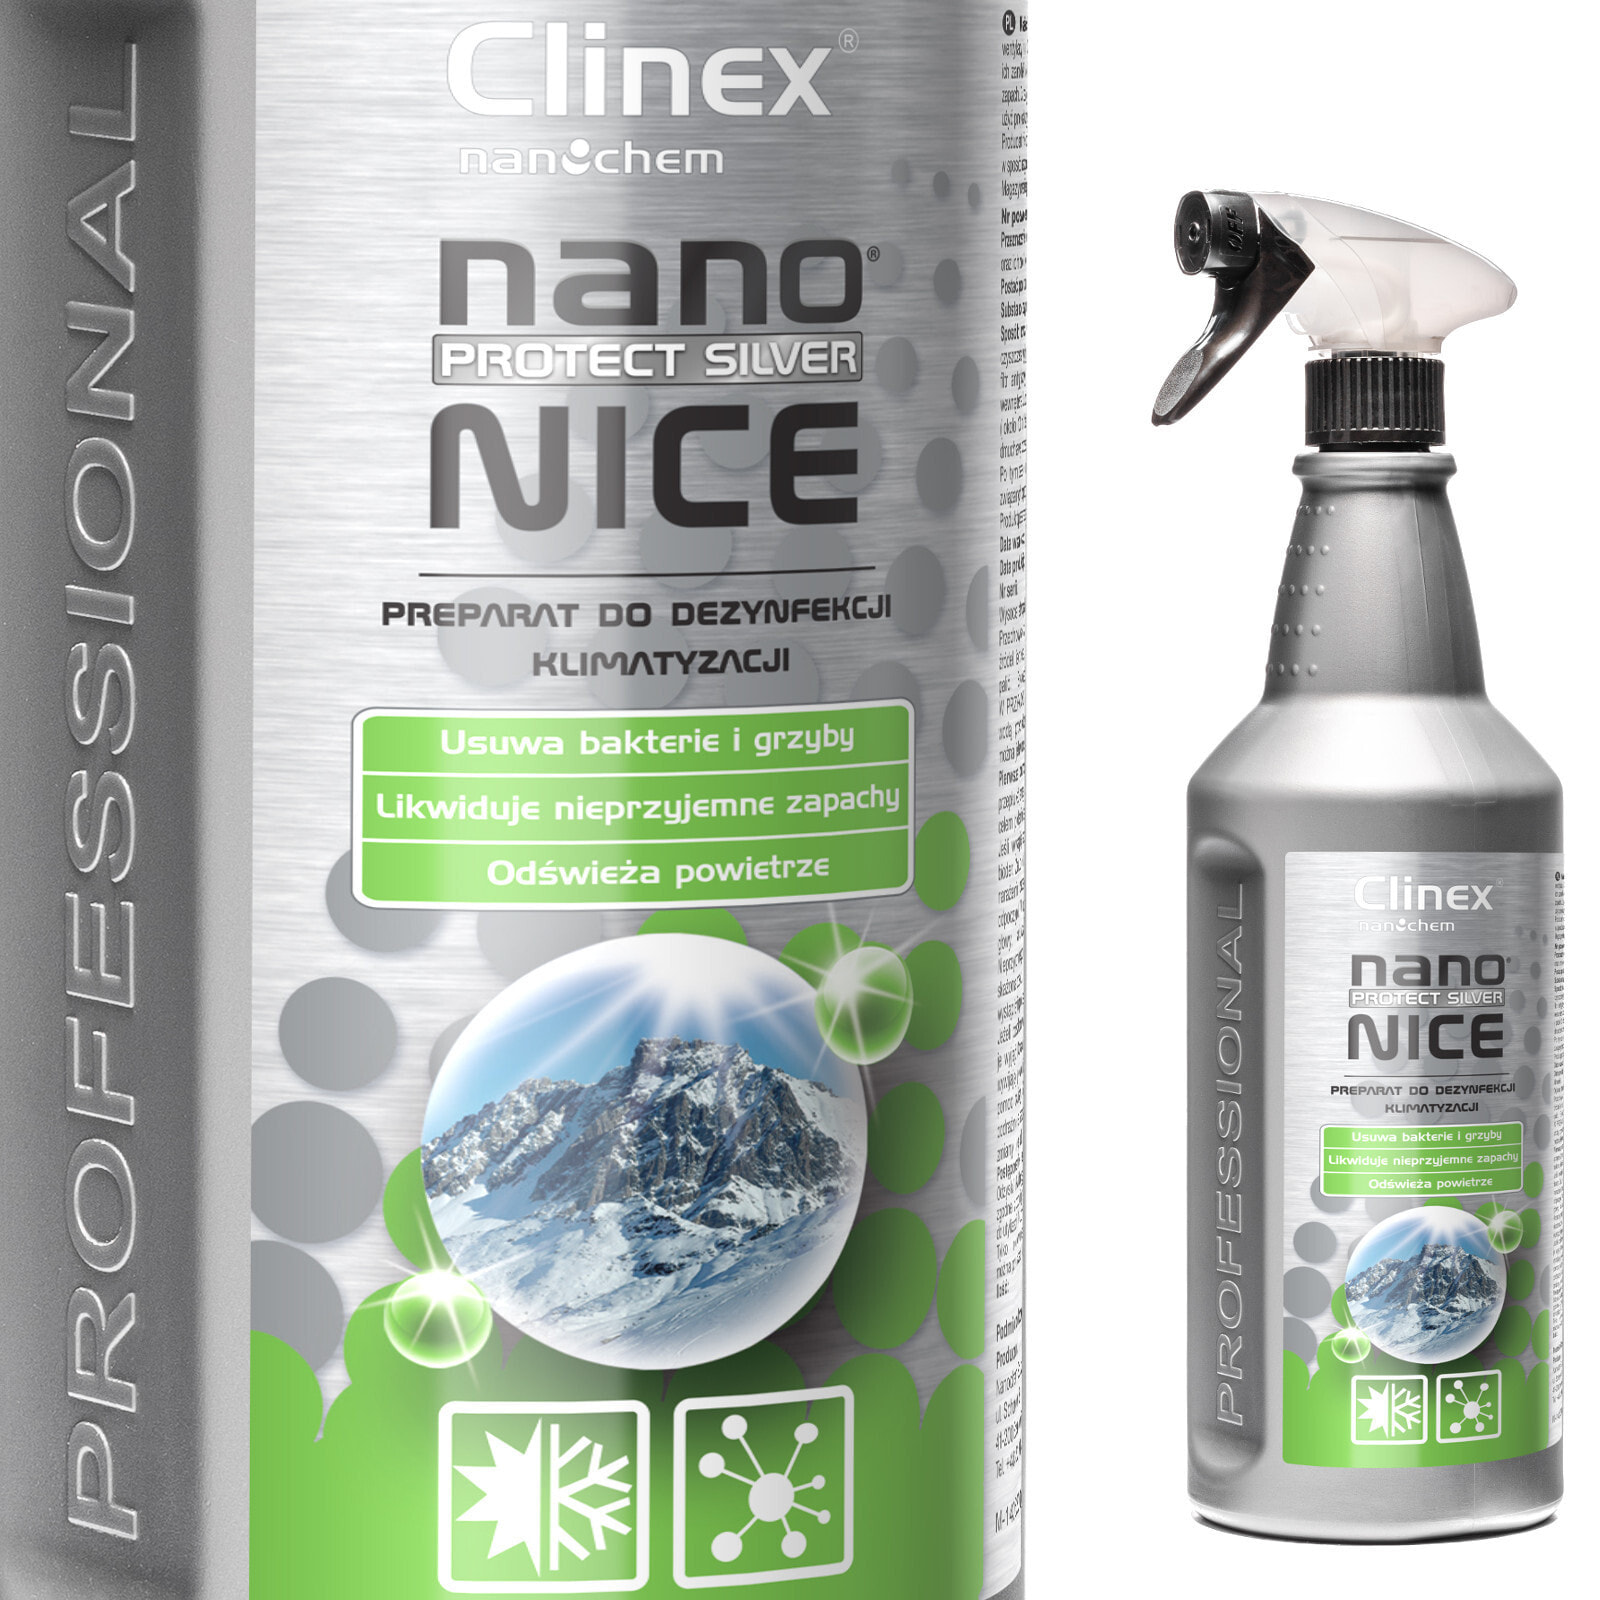 Liquid agent for disinfecting fungus in air conditioning and ventilation CLINEX Nano Protect Silver Nice 1L